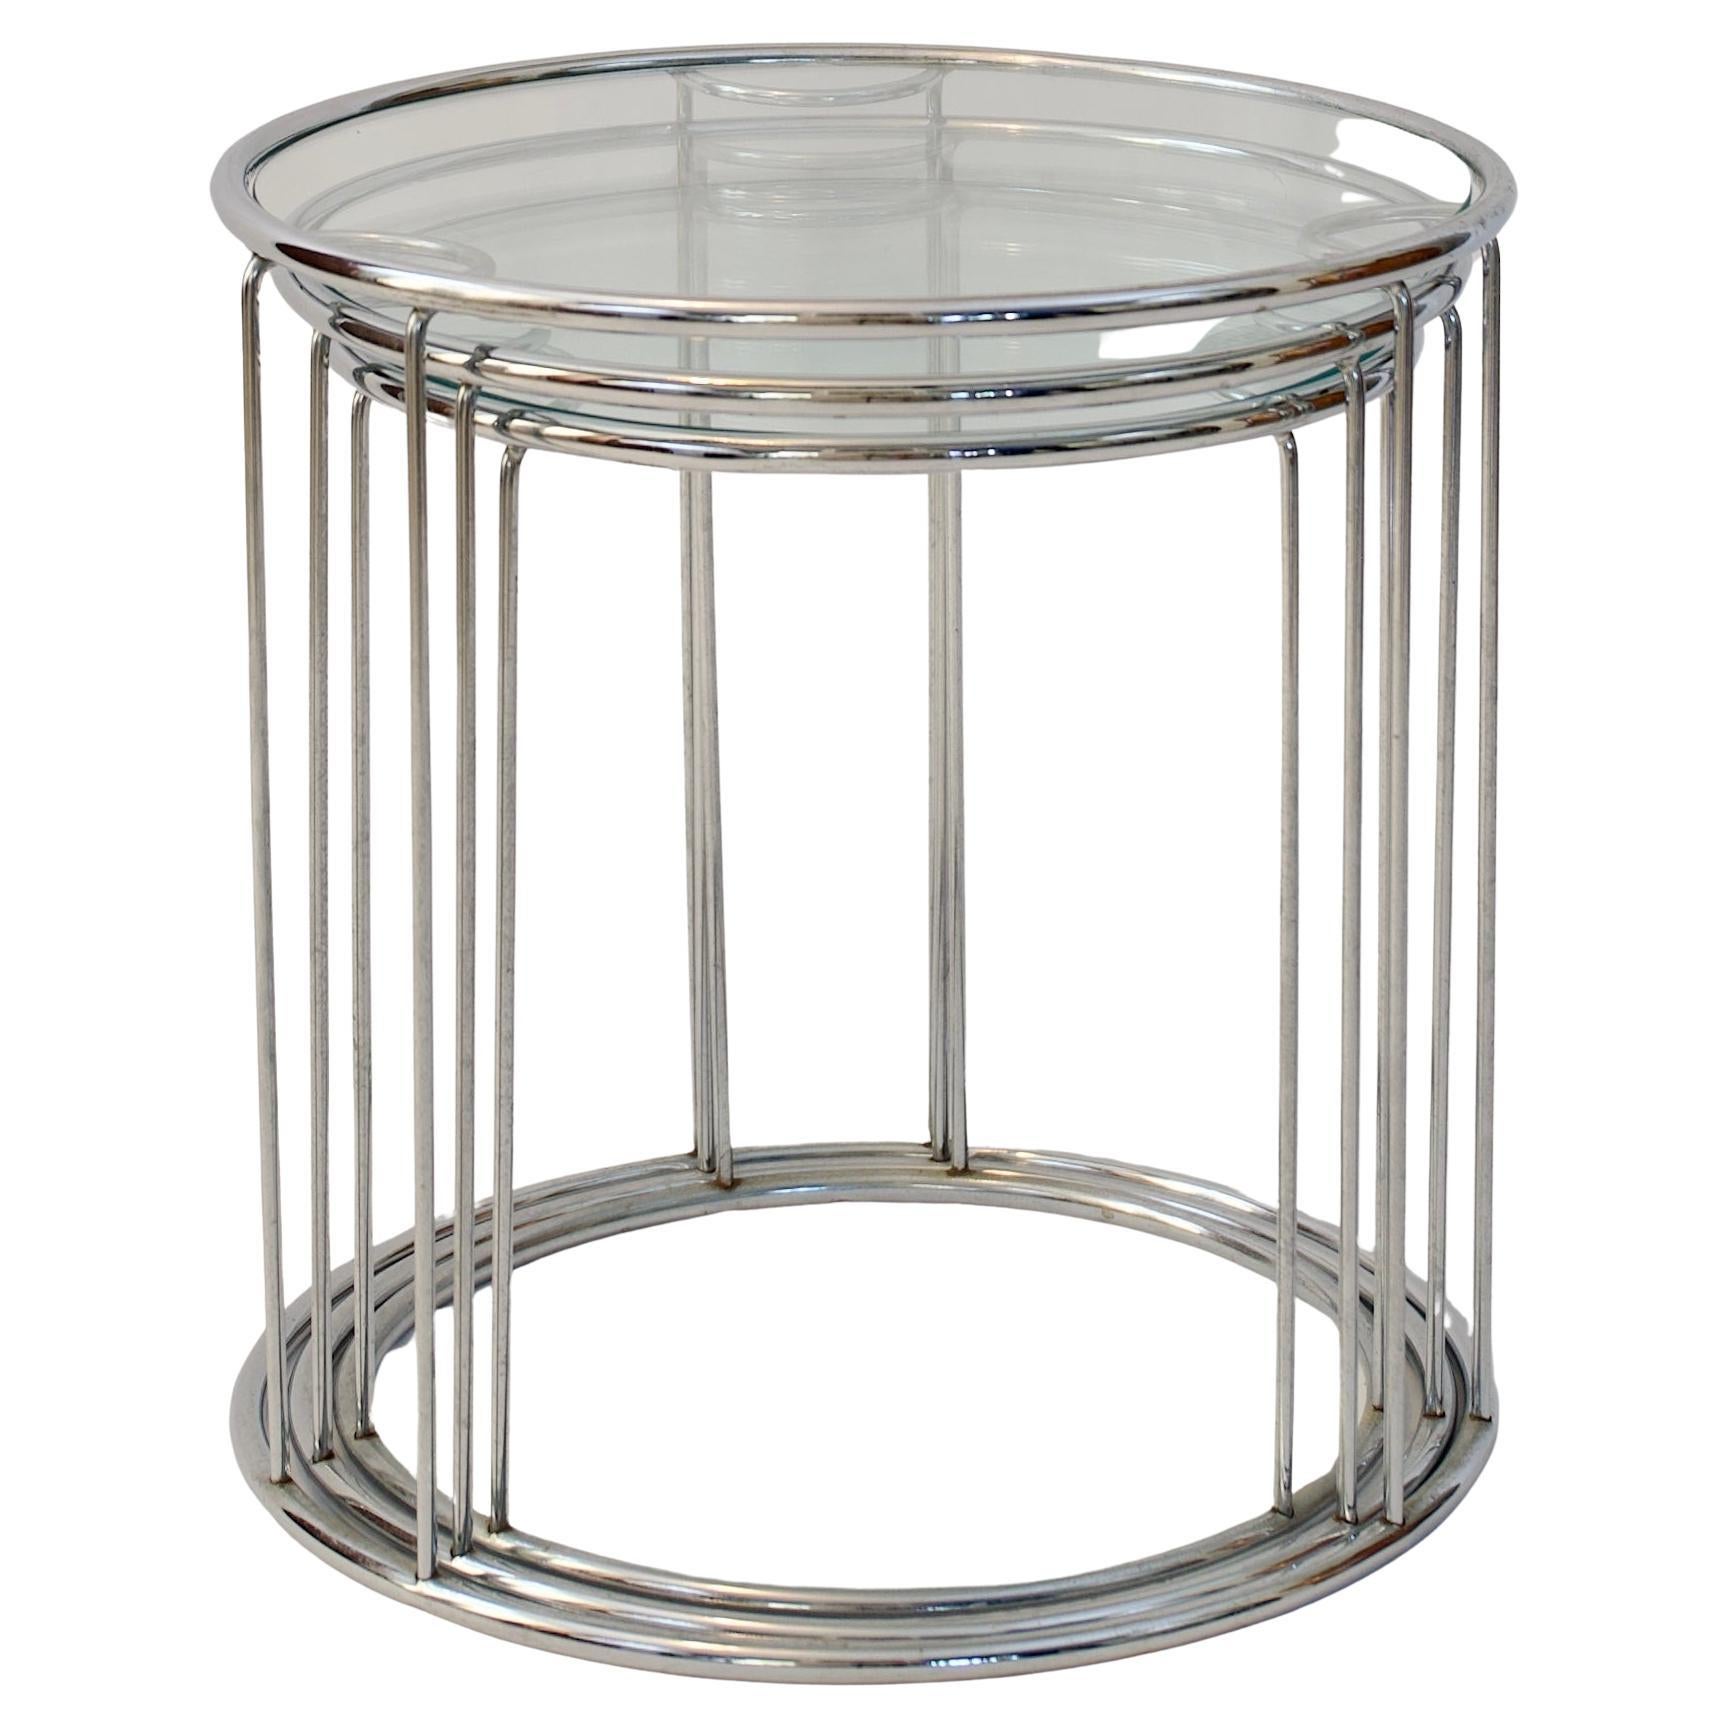 Set of Three Round Chrome and Glass Nesting End Tables Milo Baughman Style